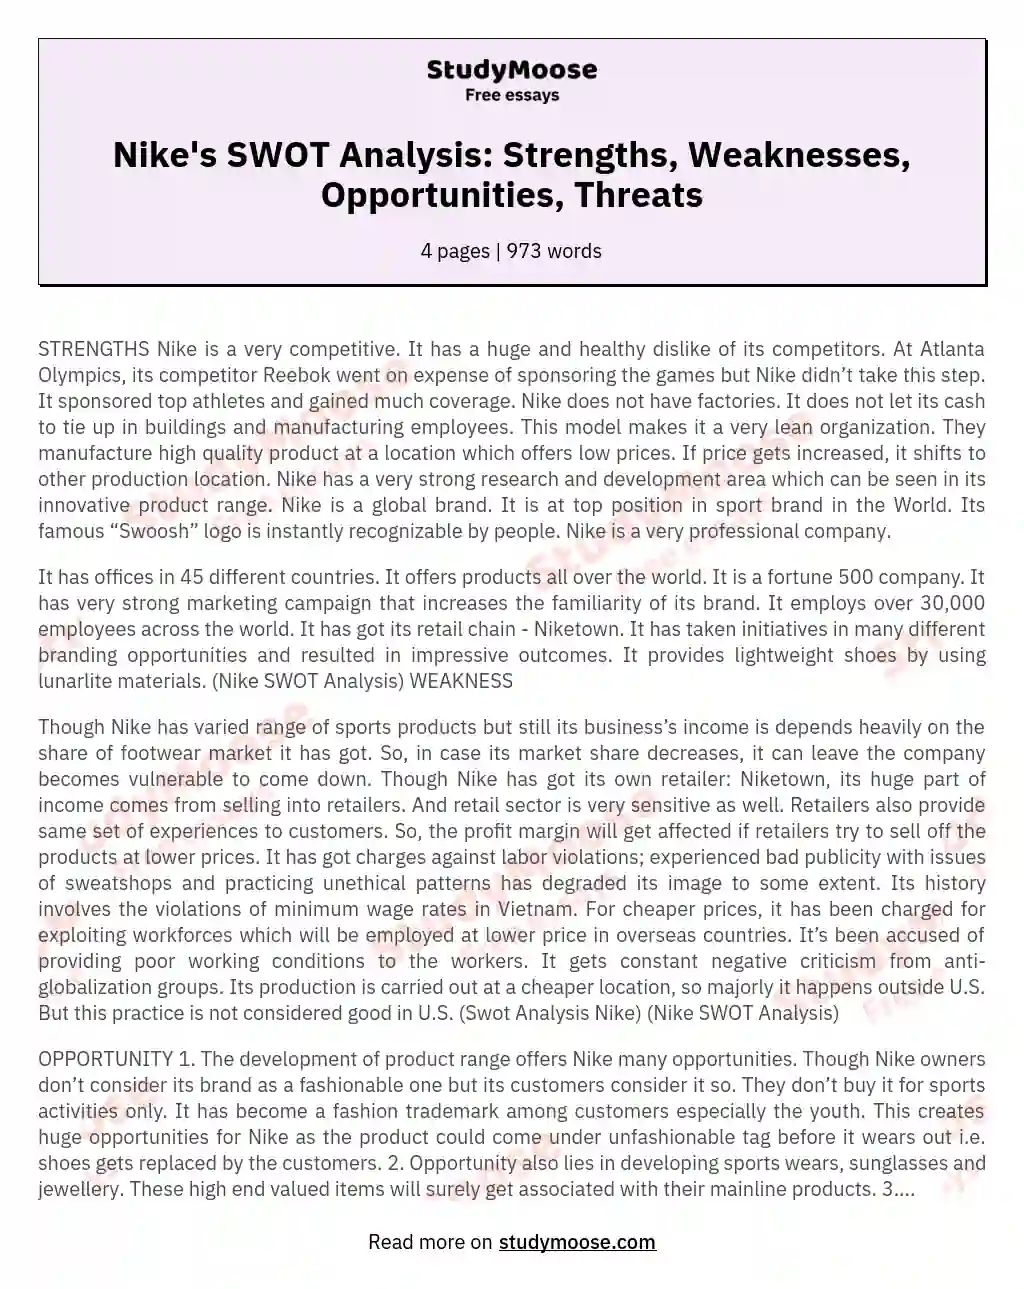 Nike's SWOT Analysis: Strengths, Weaknesses, Opportunities, Threats essay